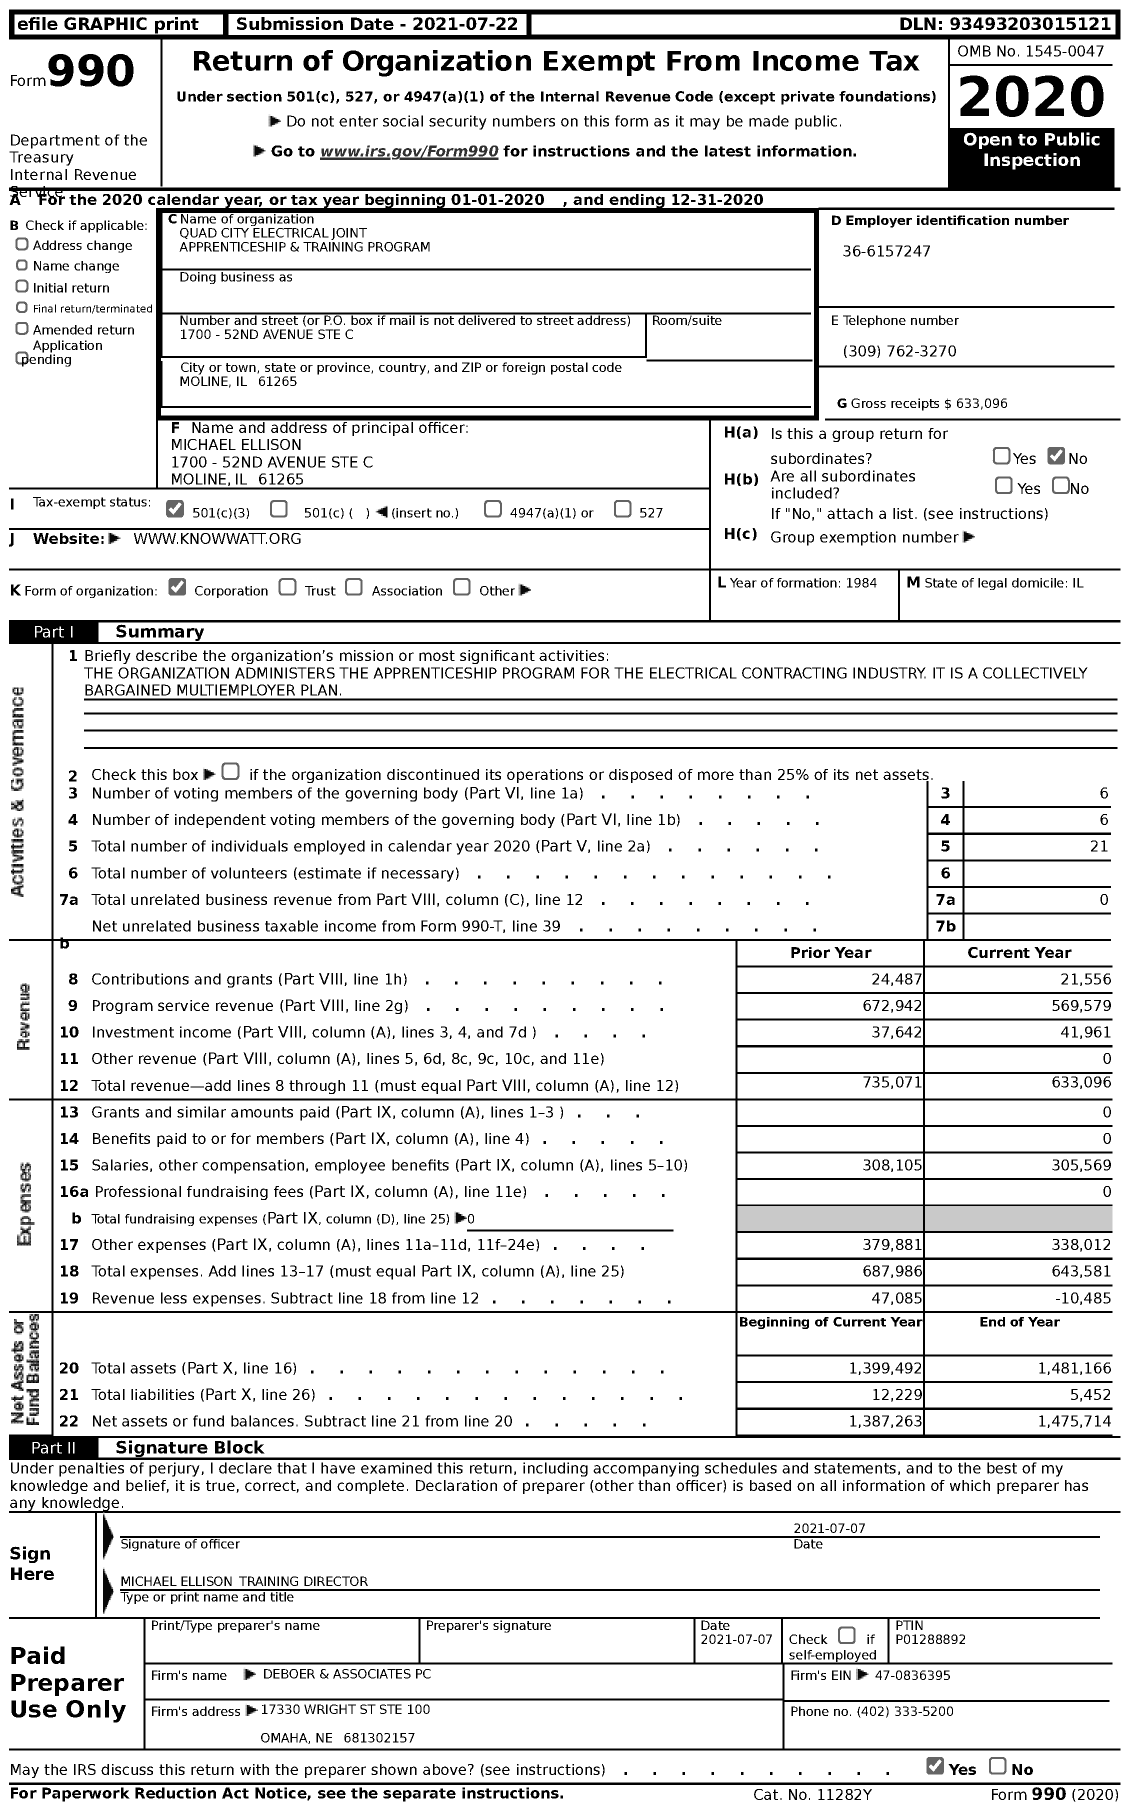 Image of first page of 2020 Form 990 for Quad City Electrical Joint Apprenticeship and Training Program